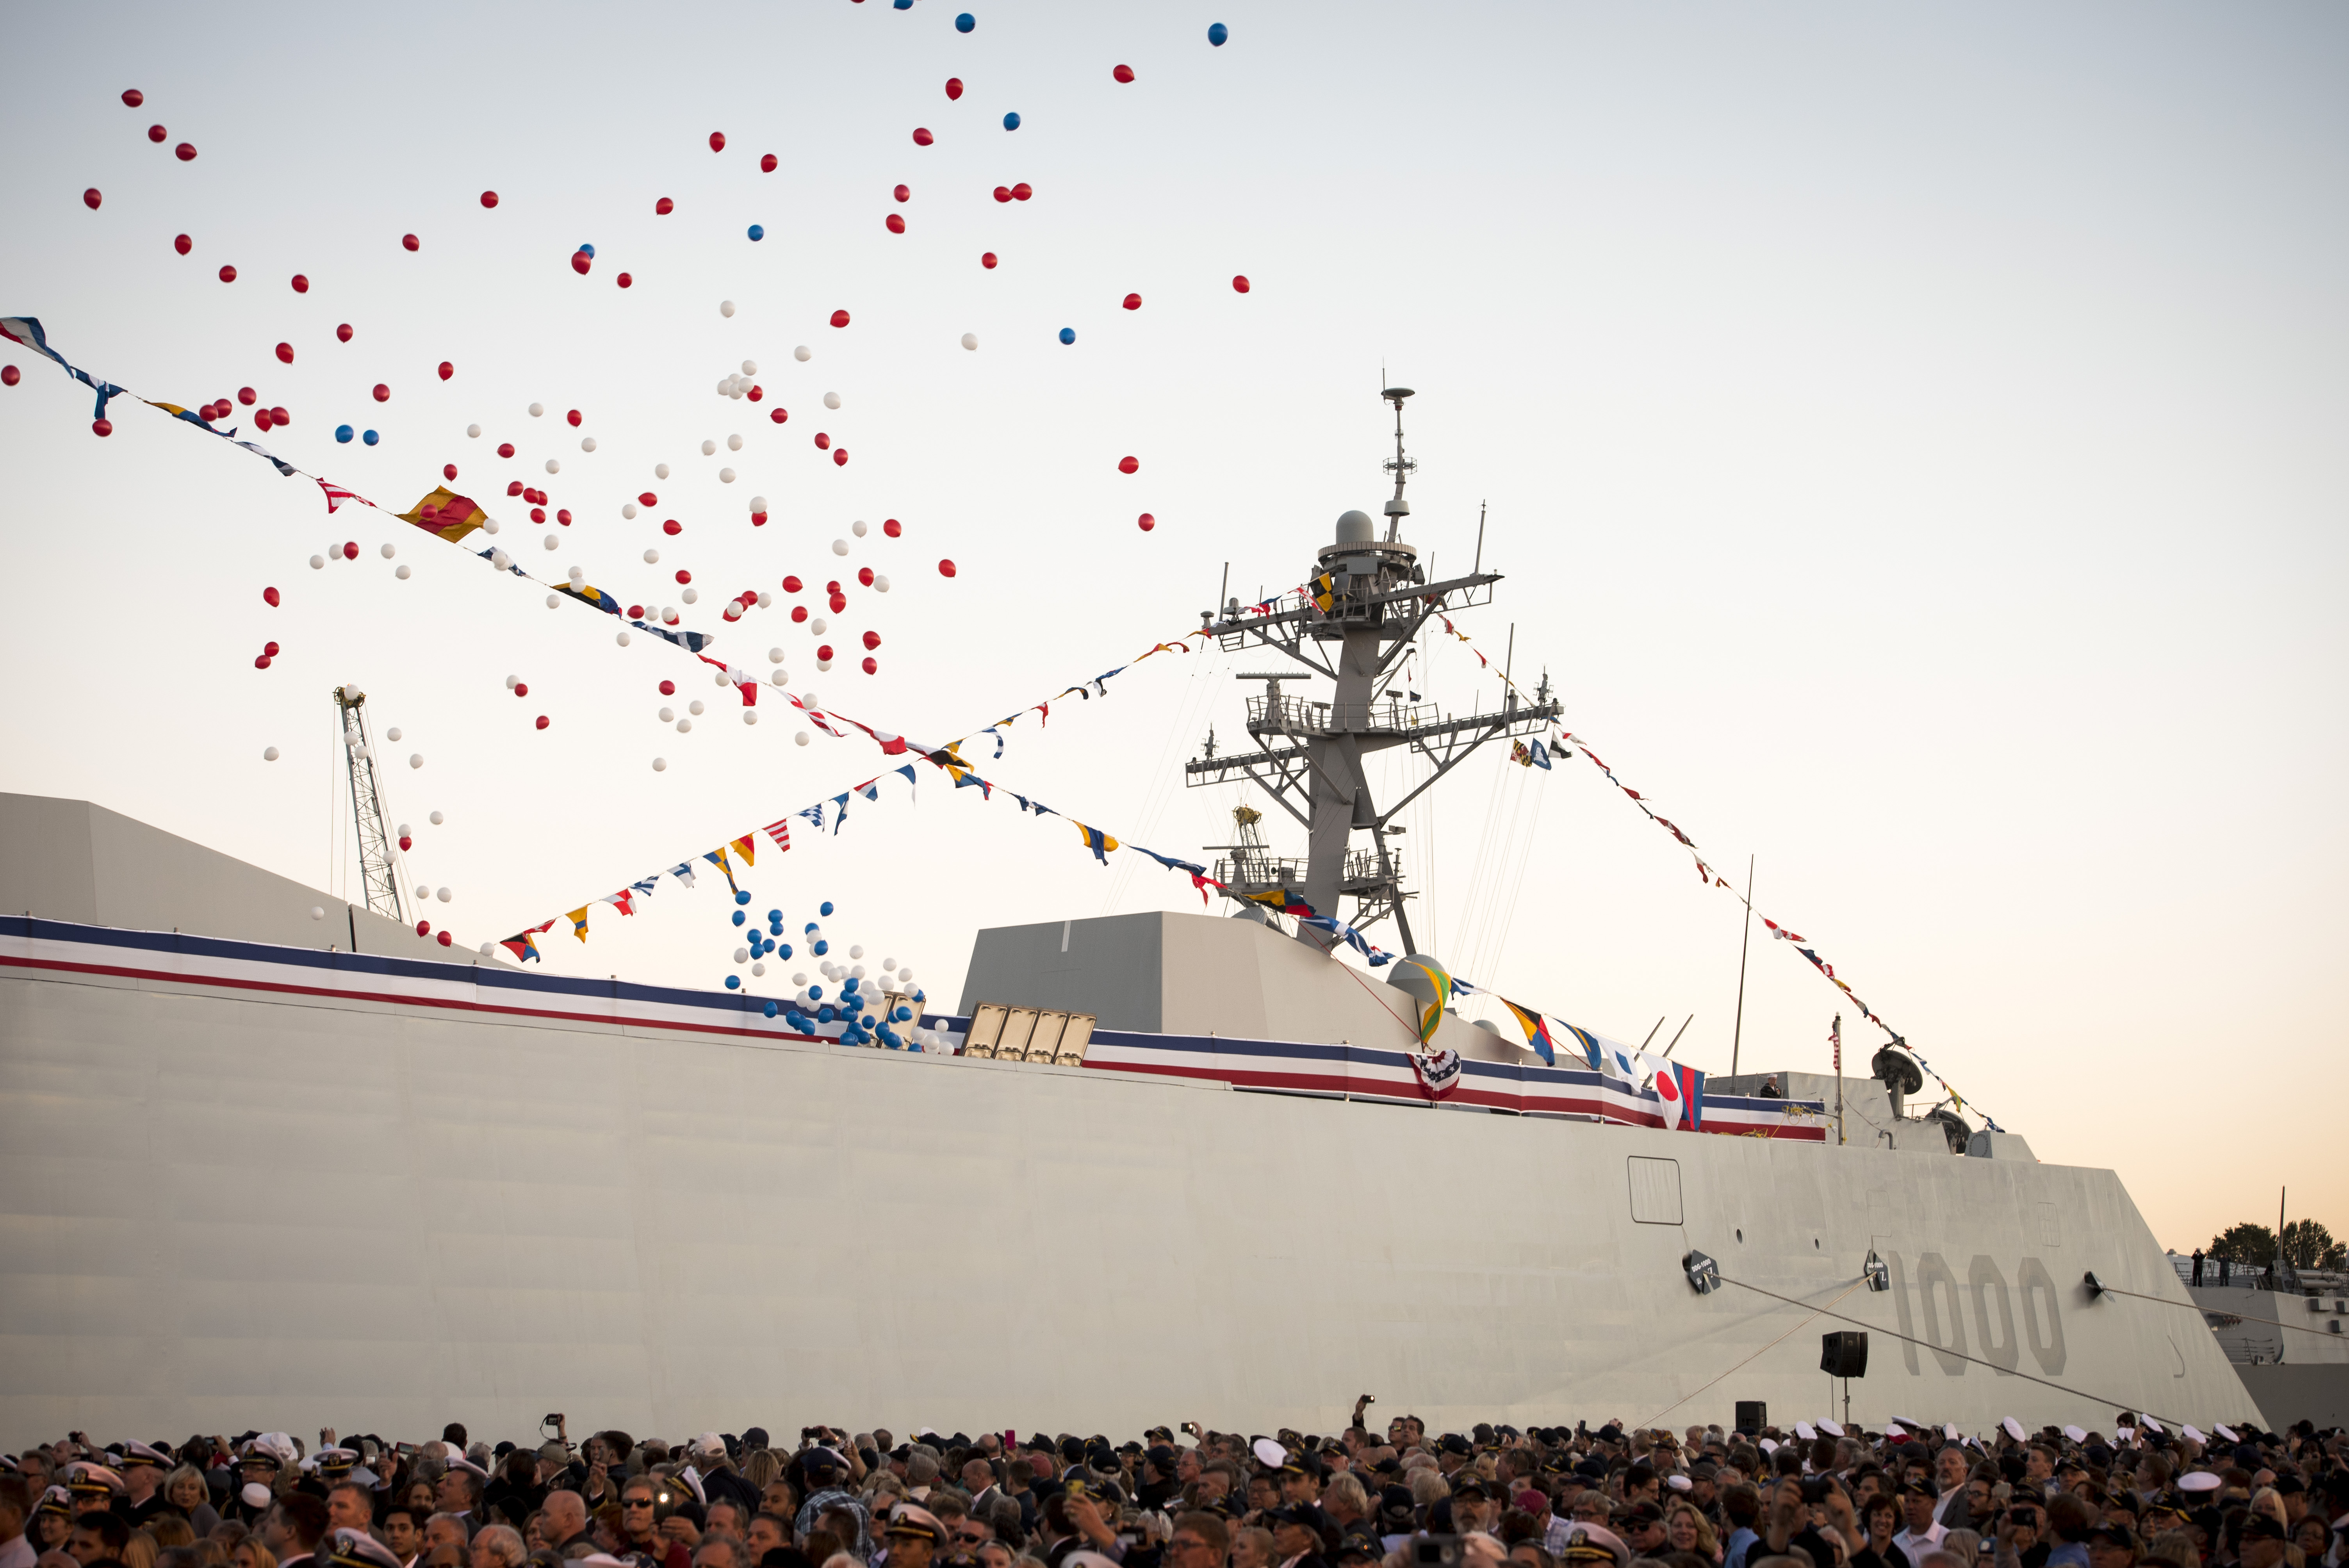 Balloons fly and the crowd applauds as the Navy's newest and most technologically advanced warship, USS Zumwalt (DDG 1000), is brought to life during a commissioning ceremony at North Locust Point in Baltimore. US Navy photo.